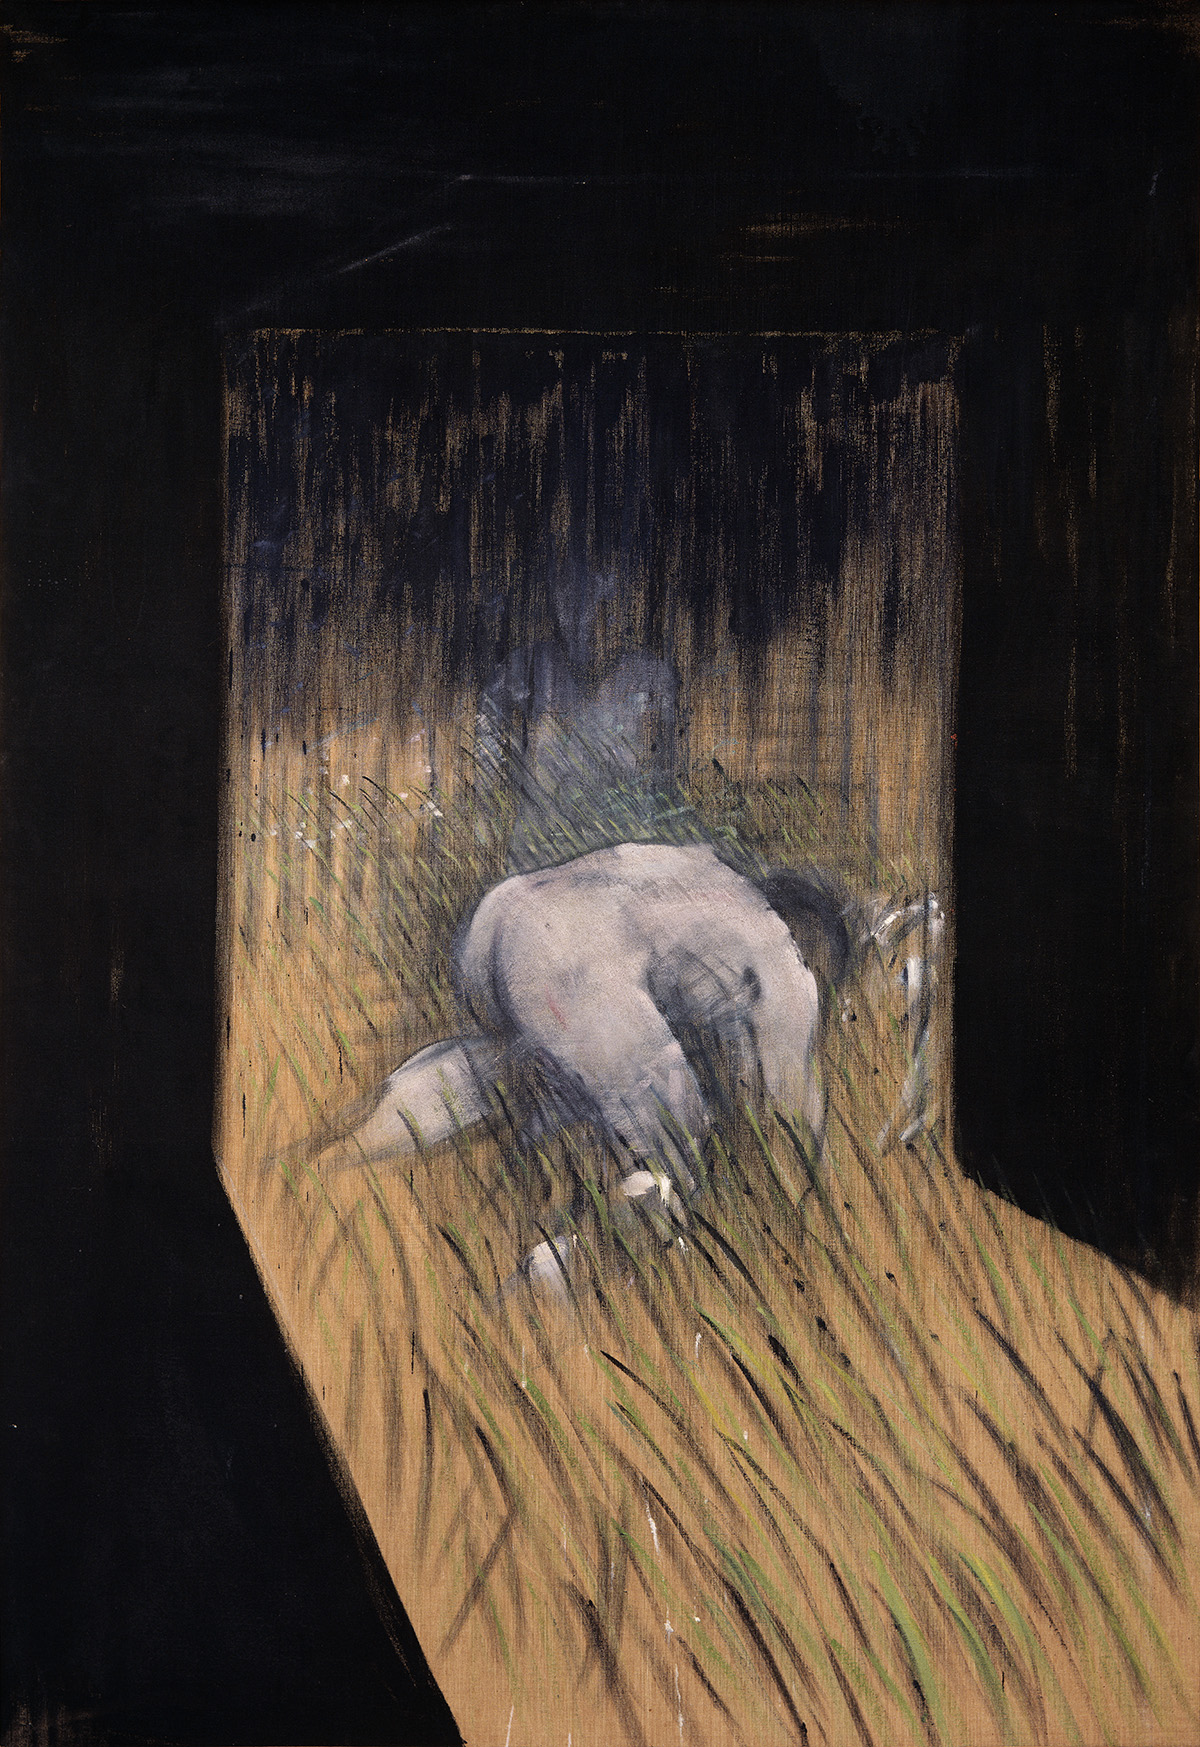 Man Kneeling in Grass, 1952. Oil on canvas. CR no. 52-13 © The Estate of Francis Bacon / DACS London 2022. All rights reserved.